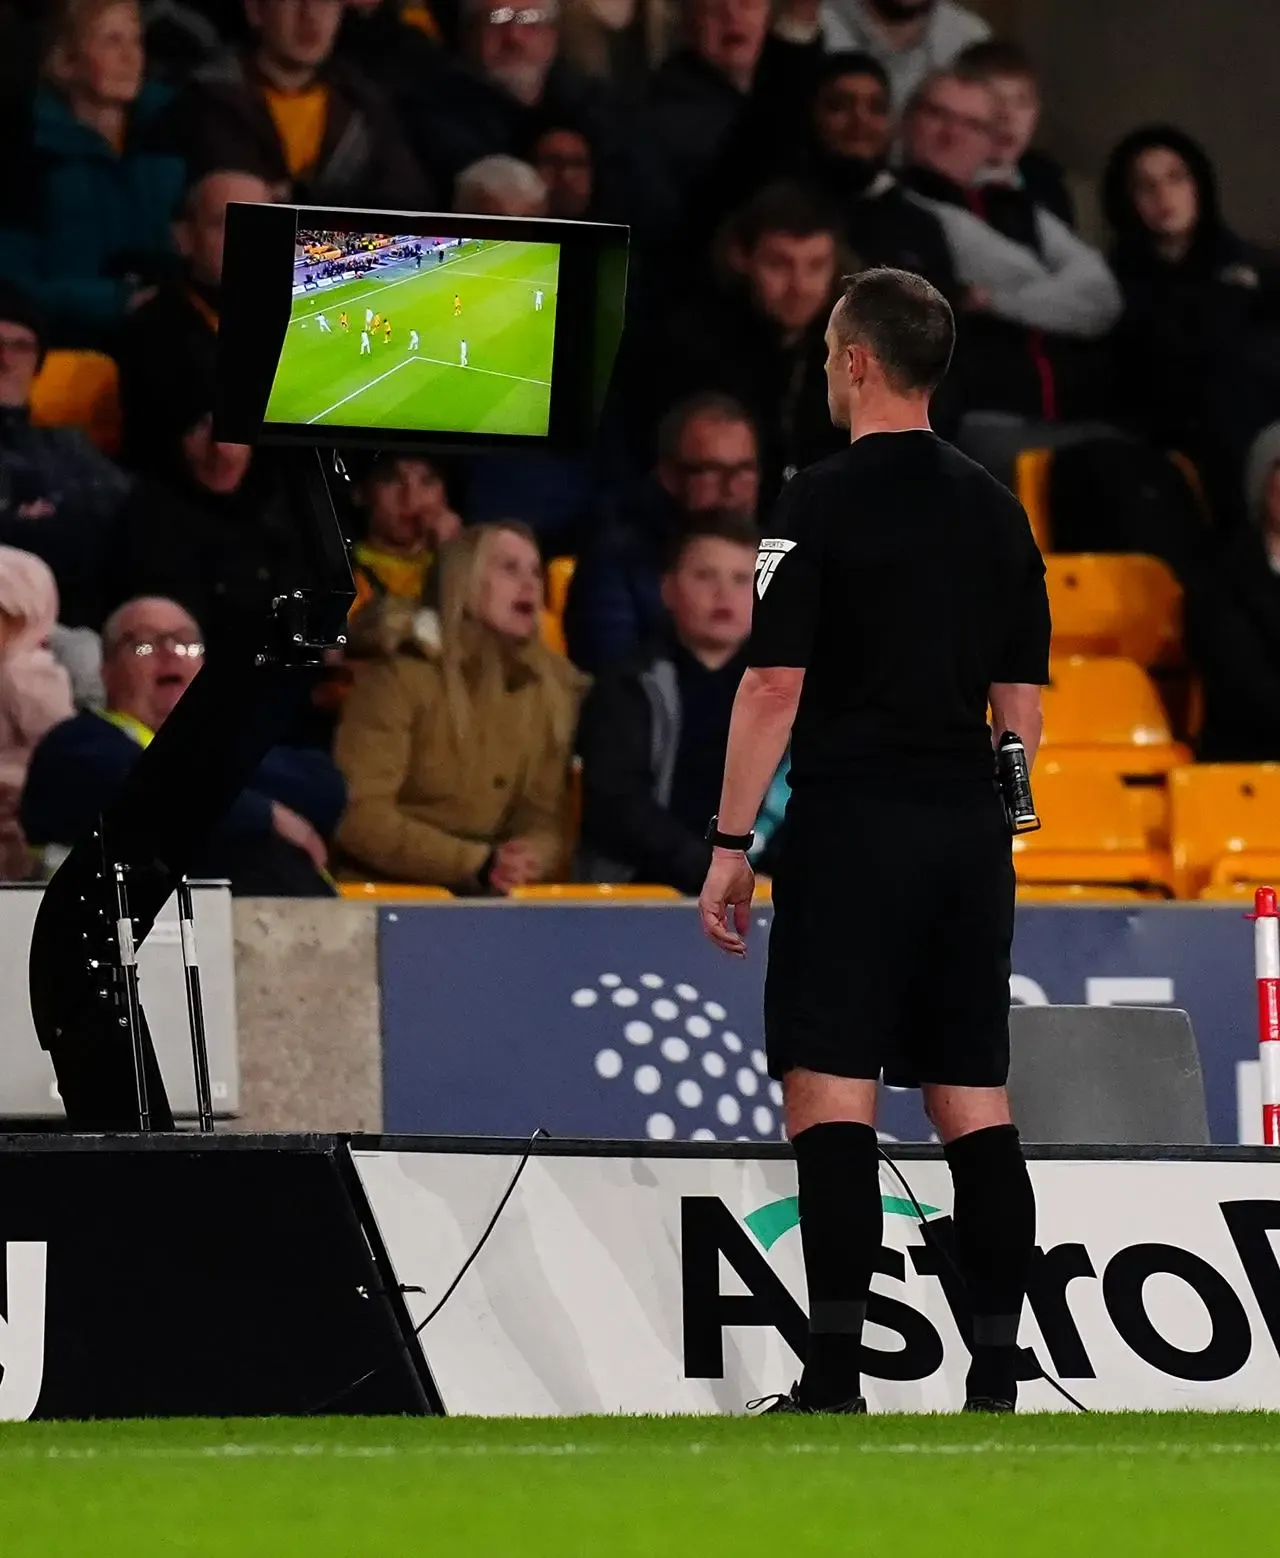 Forty eight per cent of fans support keeping VAR if decisions are taken more quickly and it is used more sparingly 